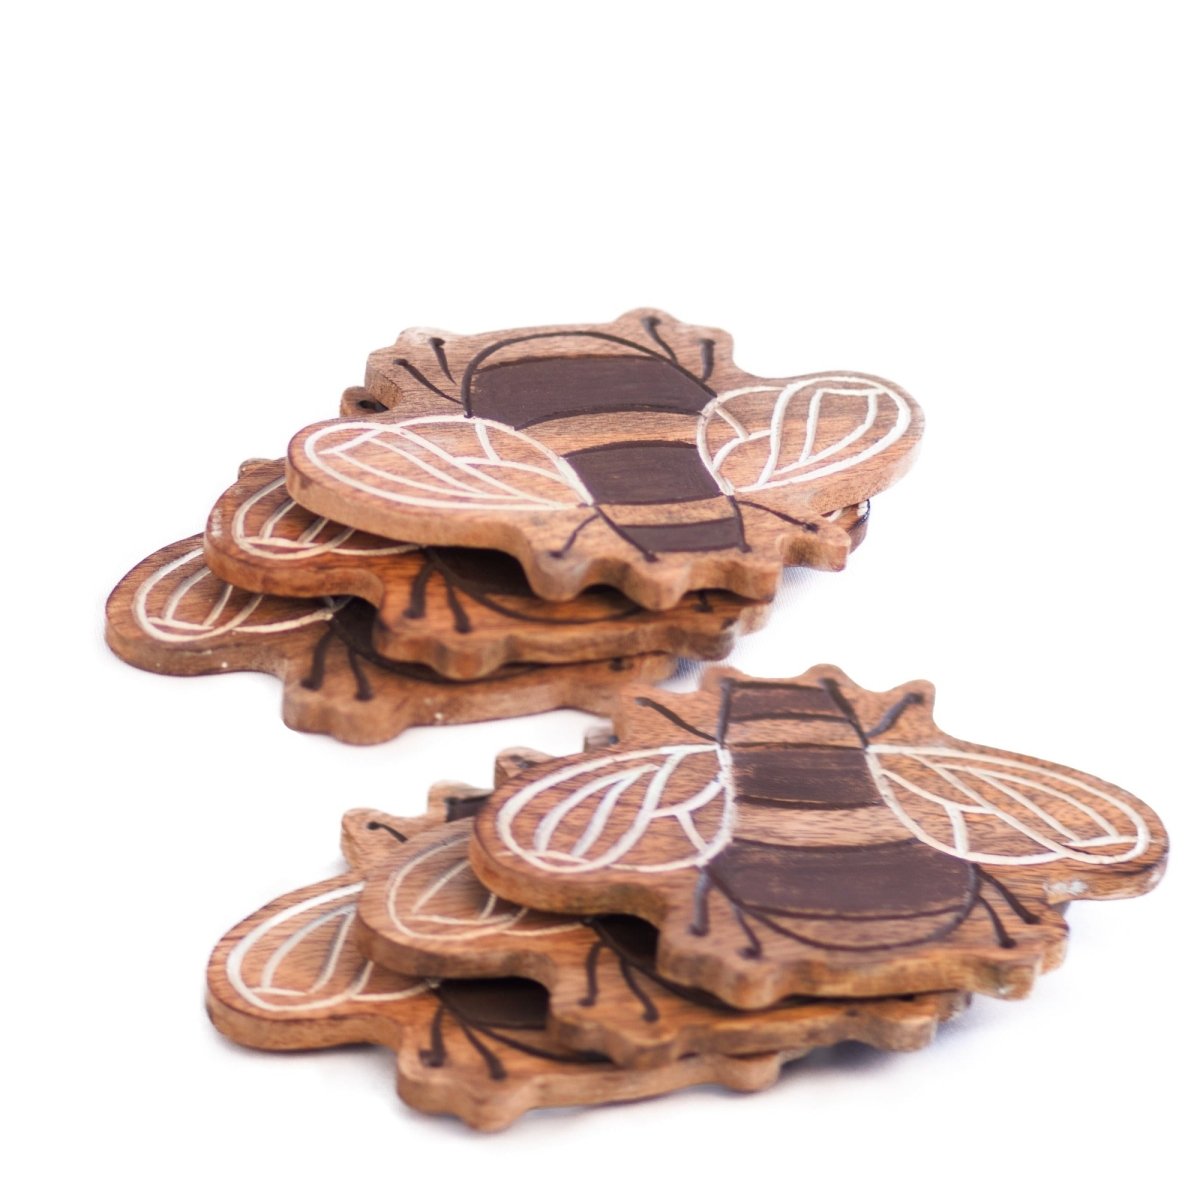 Kezevel Wooden Coasters Mango Wood - Artistically Handcrafted Fly Design Set of 6 for Serving - Coaster Plate Size 14X10 CM